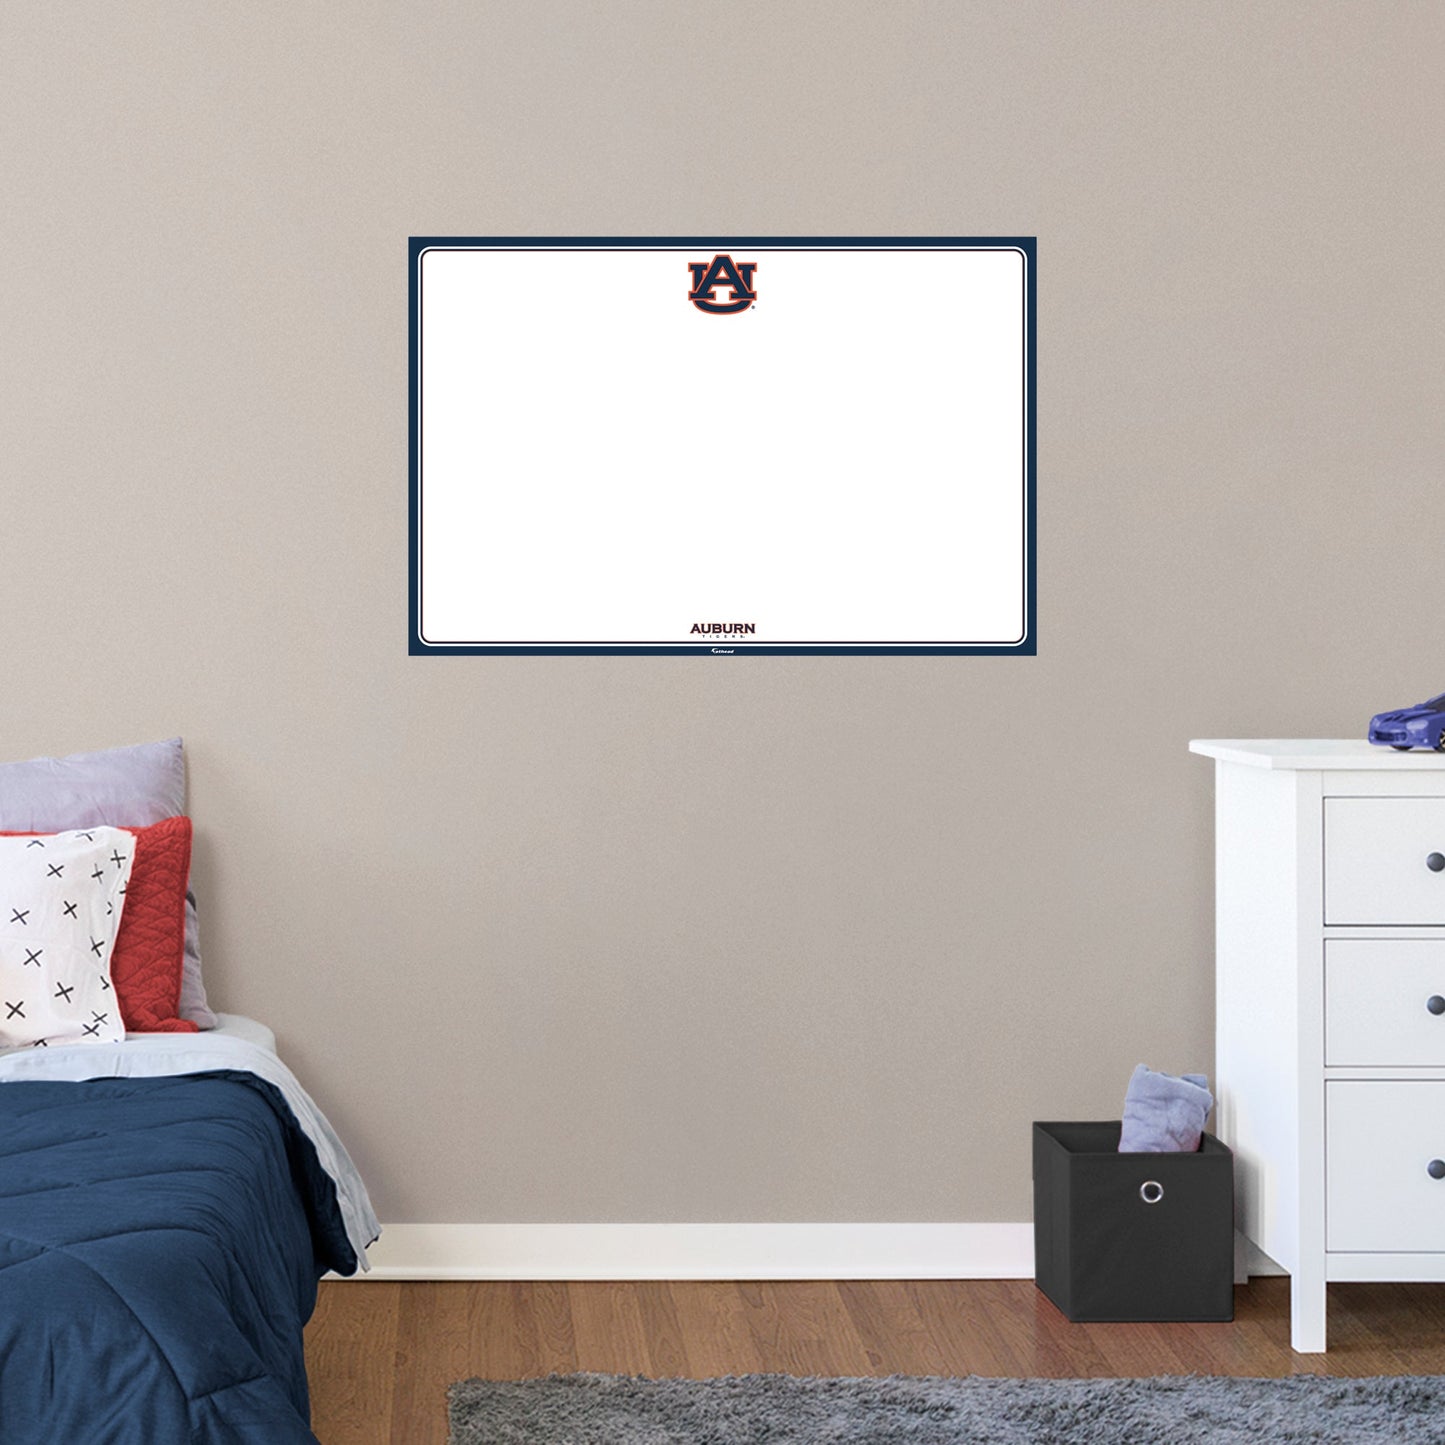 Auburn Tigers: Dry Erase White Board - Officially Licensed NCAA Removable Adhesive Decal